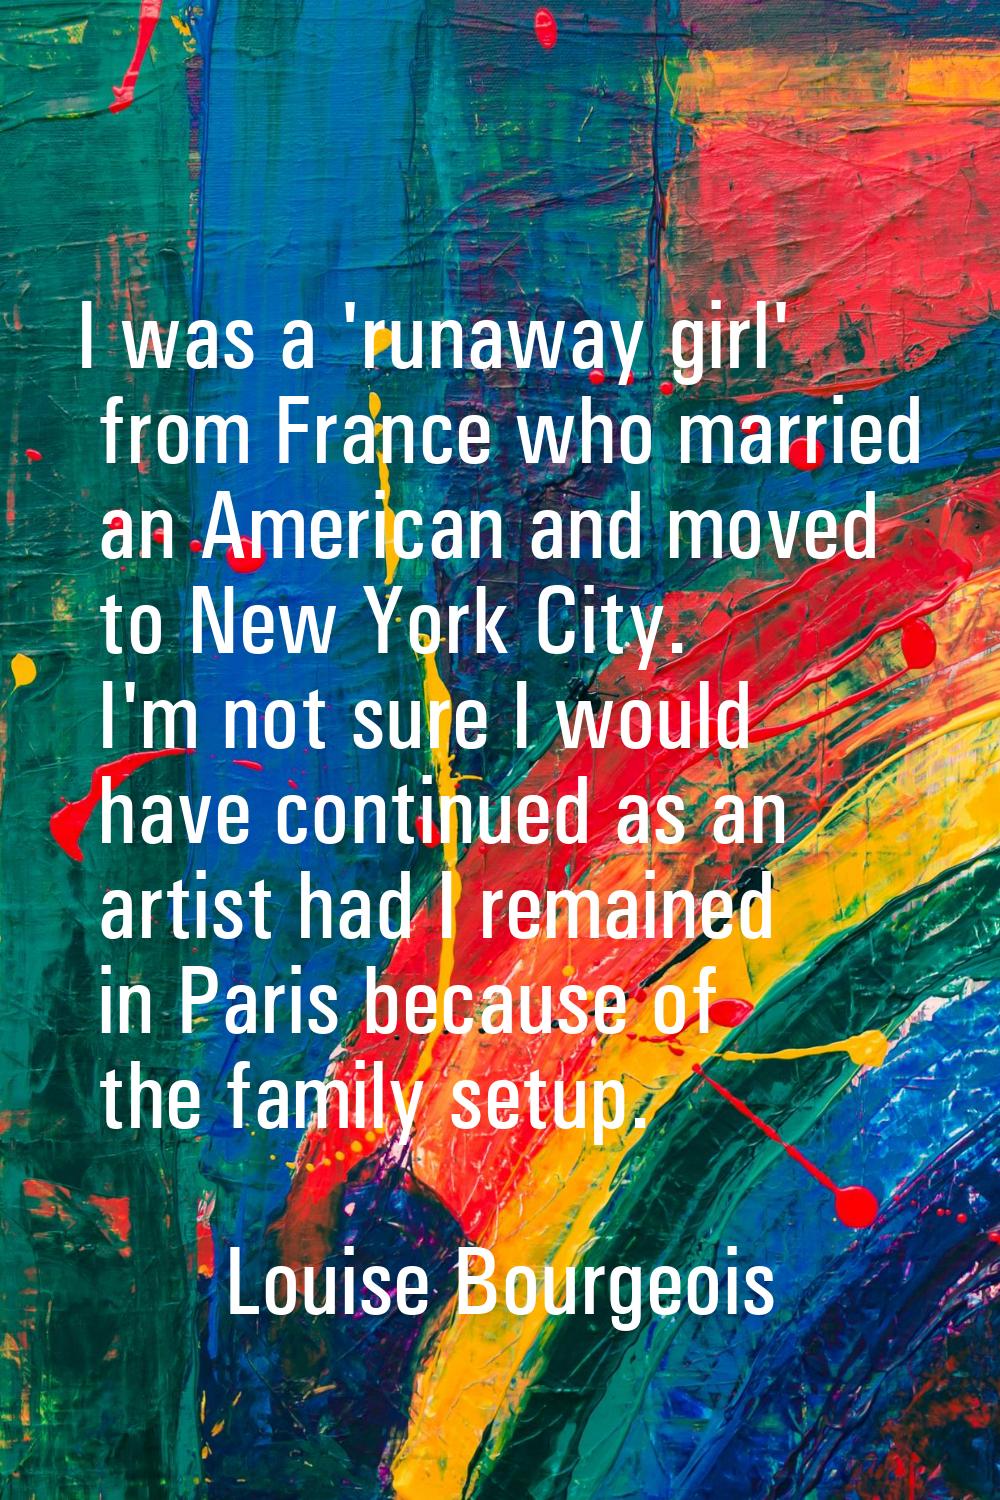 I was a 'runaway girl' from France who married an American and moved to New York City. I'm not sure